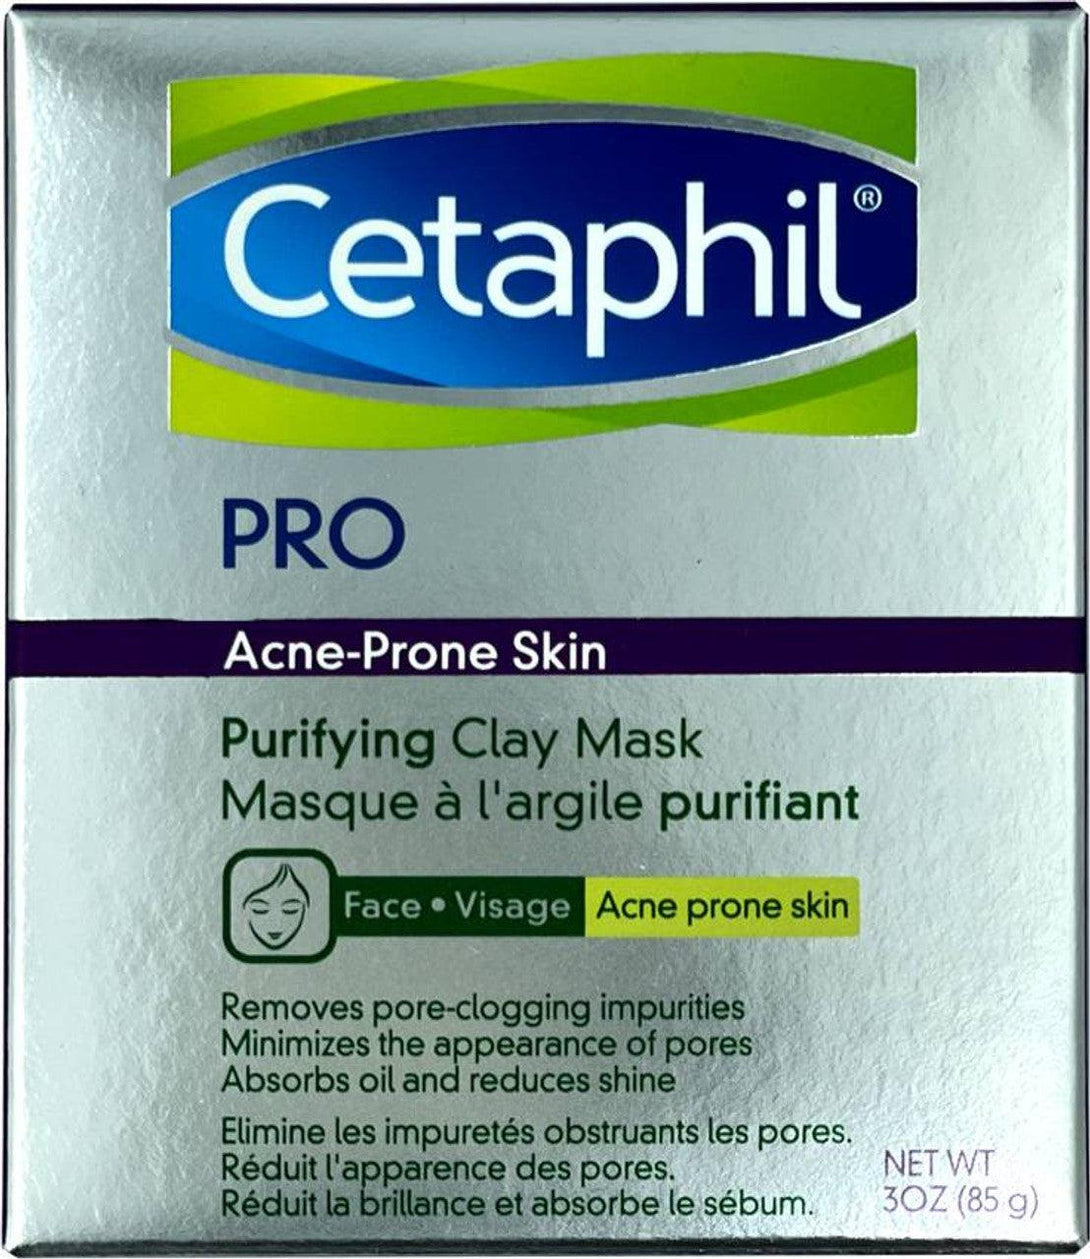 Cetaphil - Pro Acne Prone Skin Purifying Clay Mask - 85g Cosmetic Holic